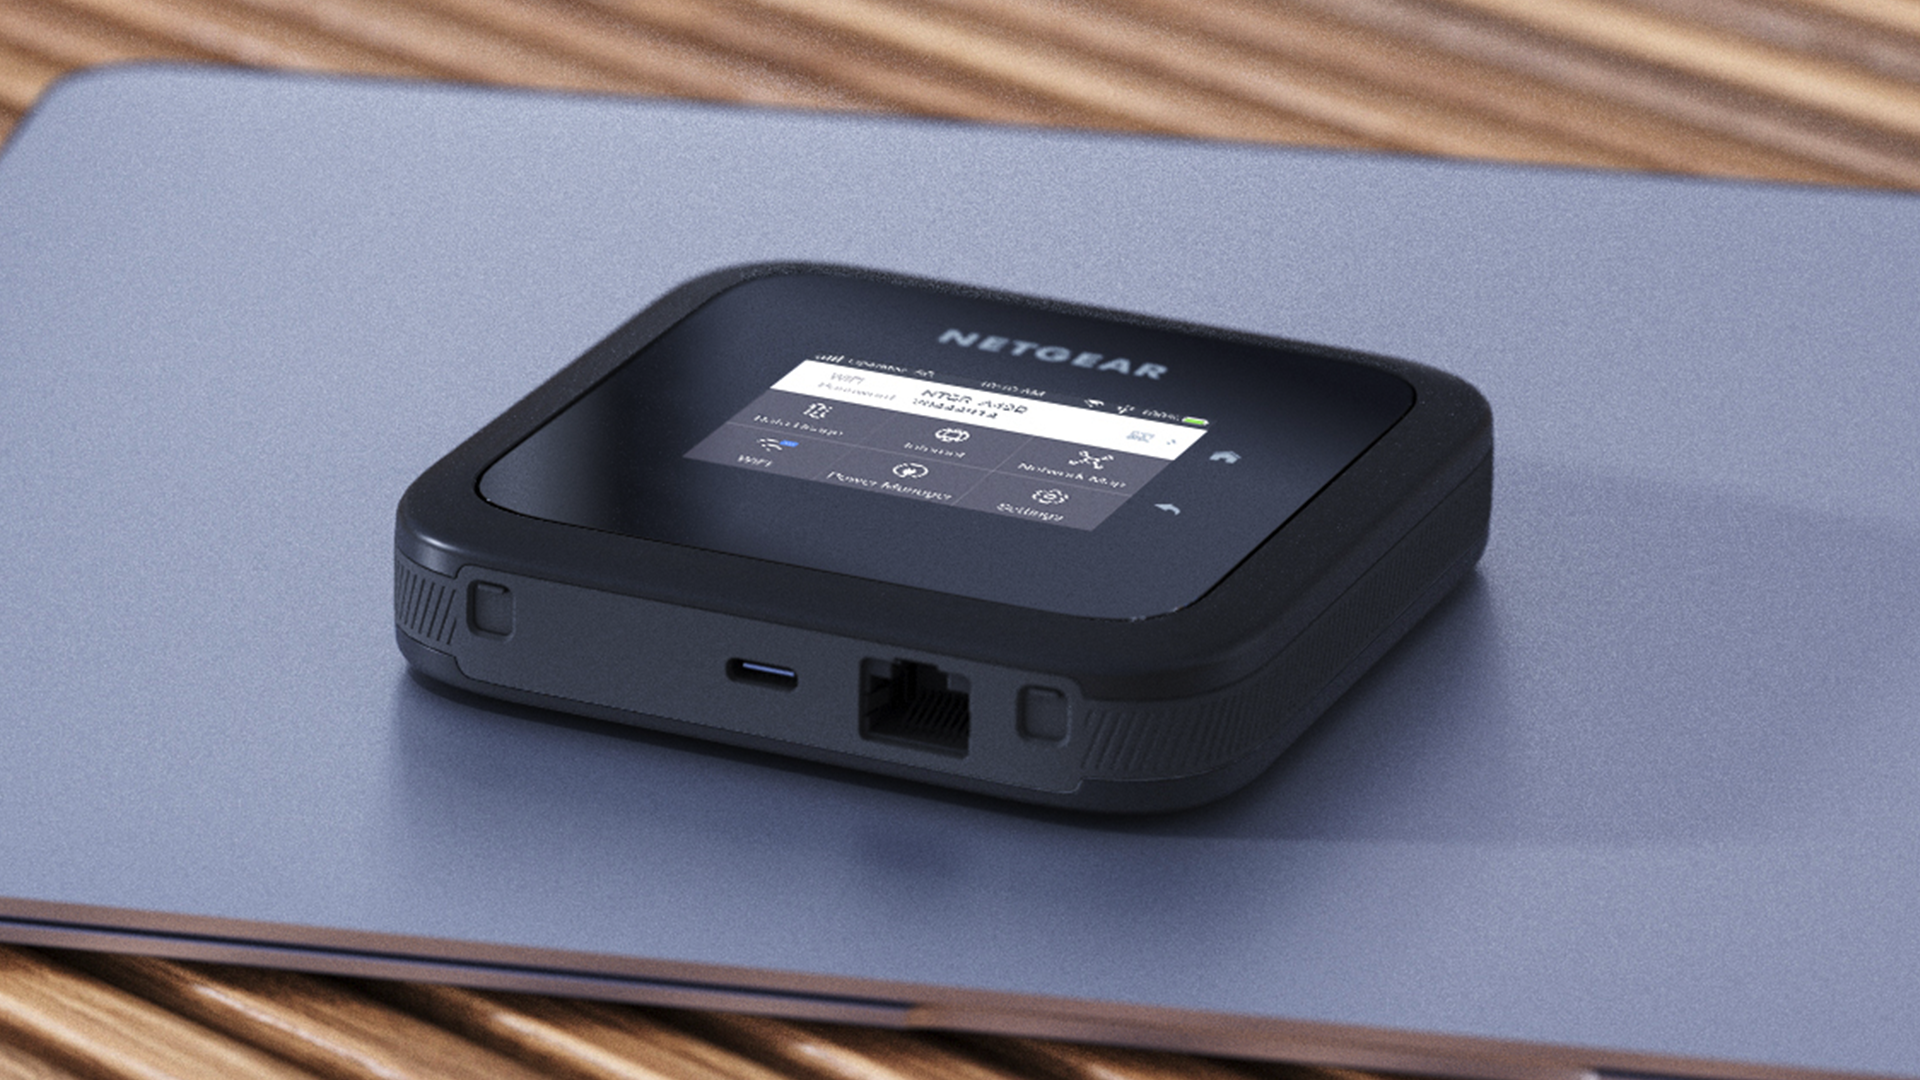 Netgear’s New M6 5G Mobile Hotspot Is Unlocked for Any Carrier – Review Geek